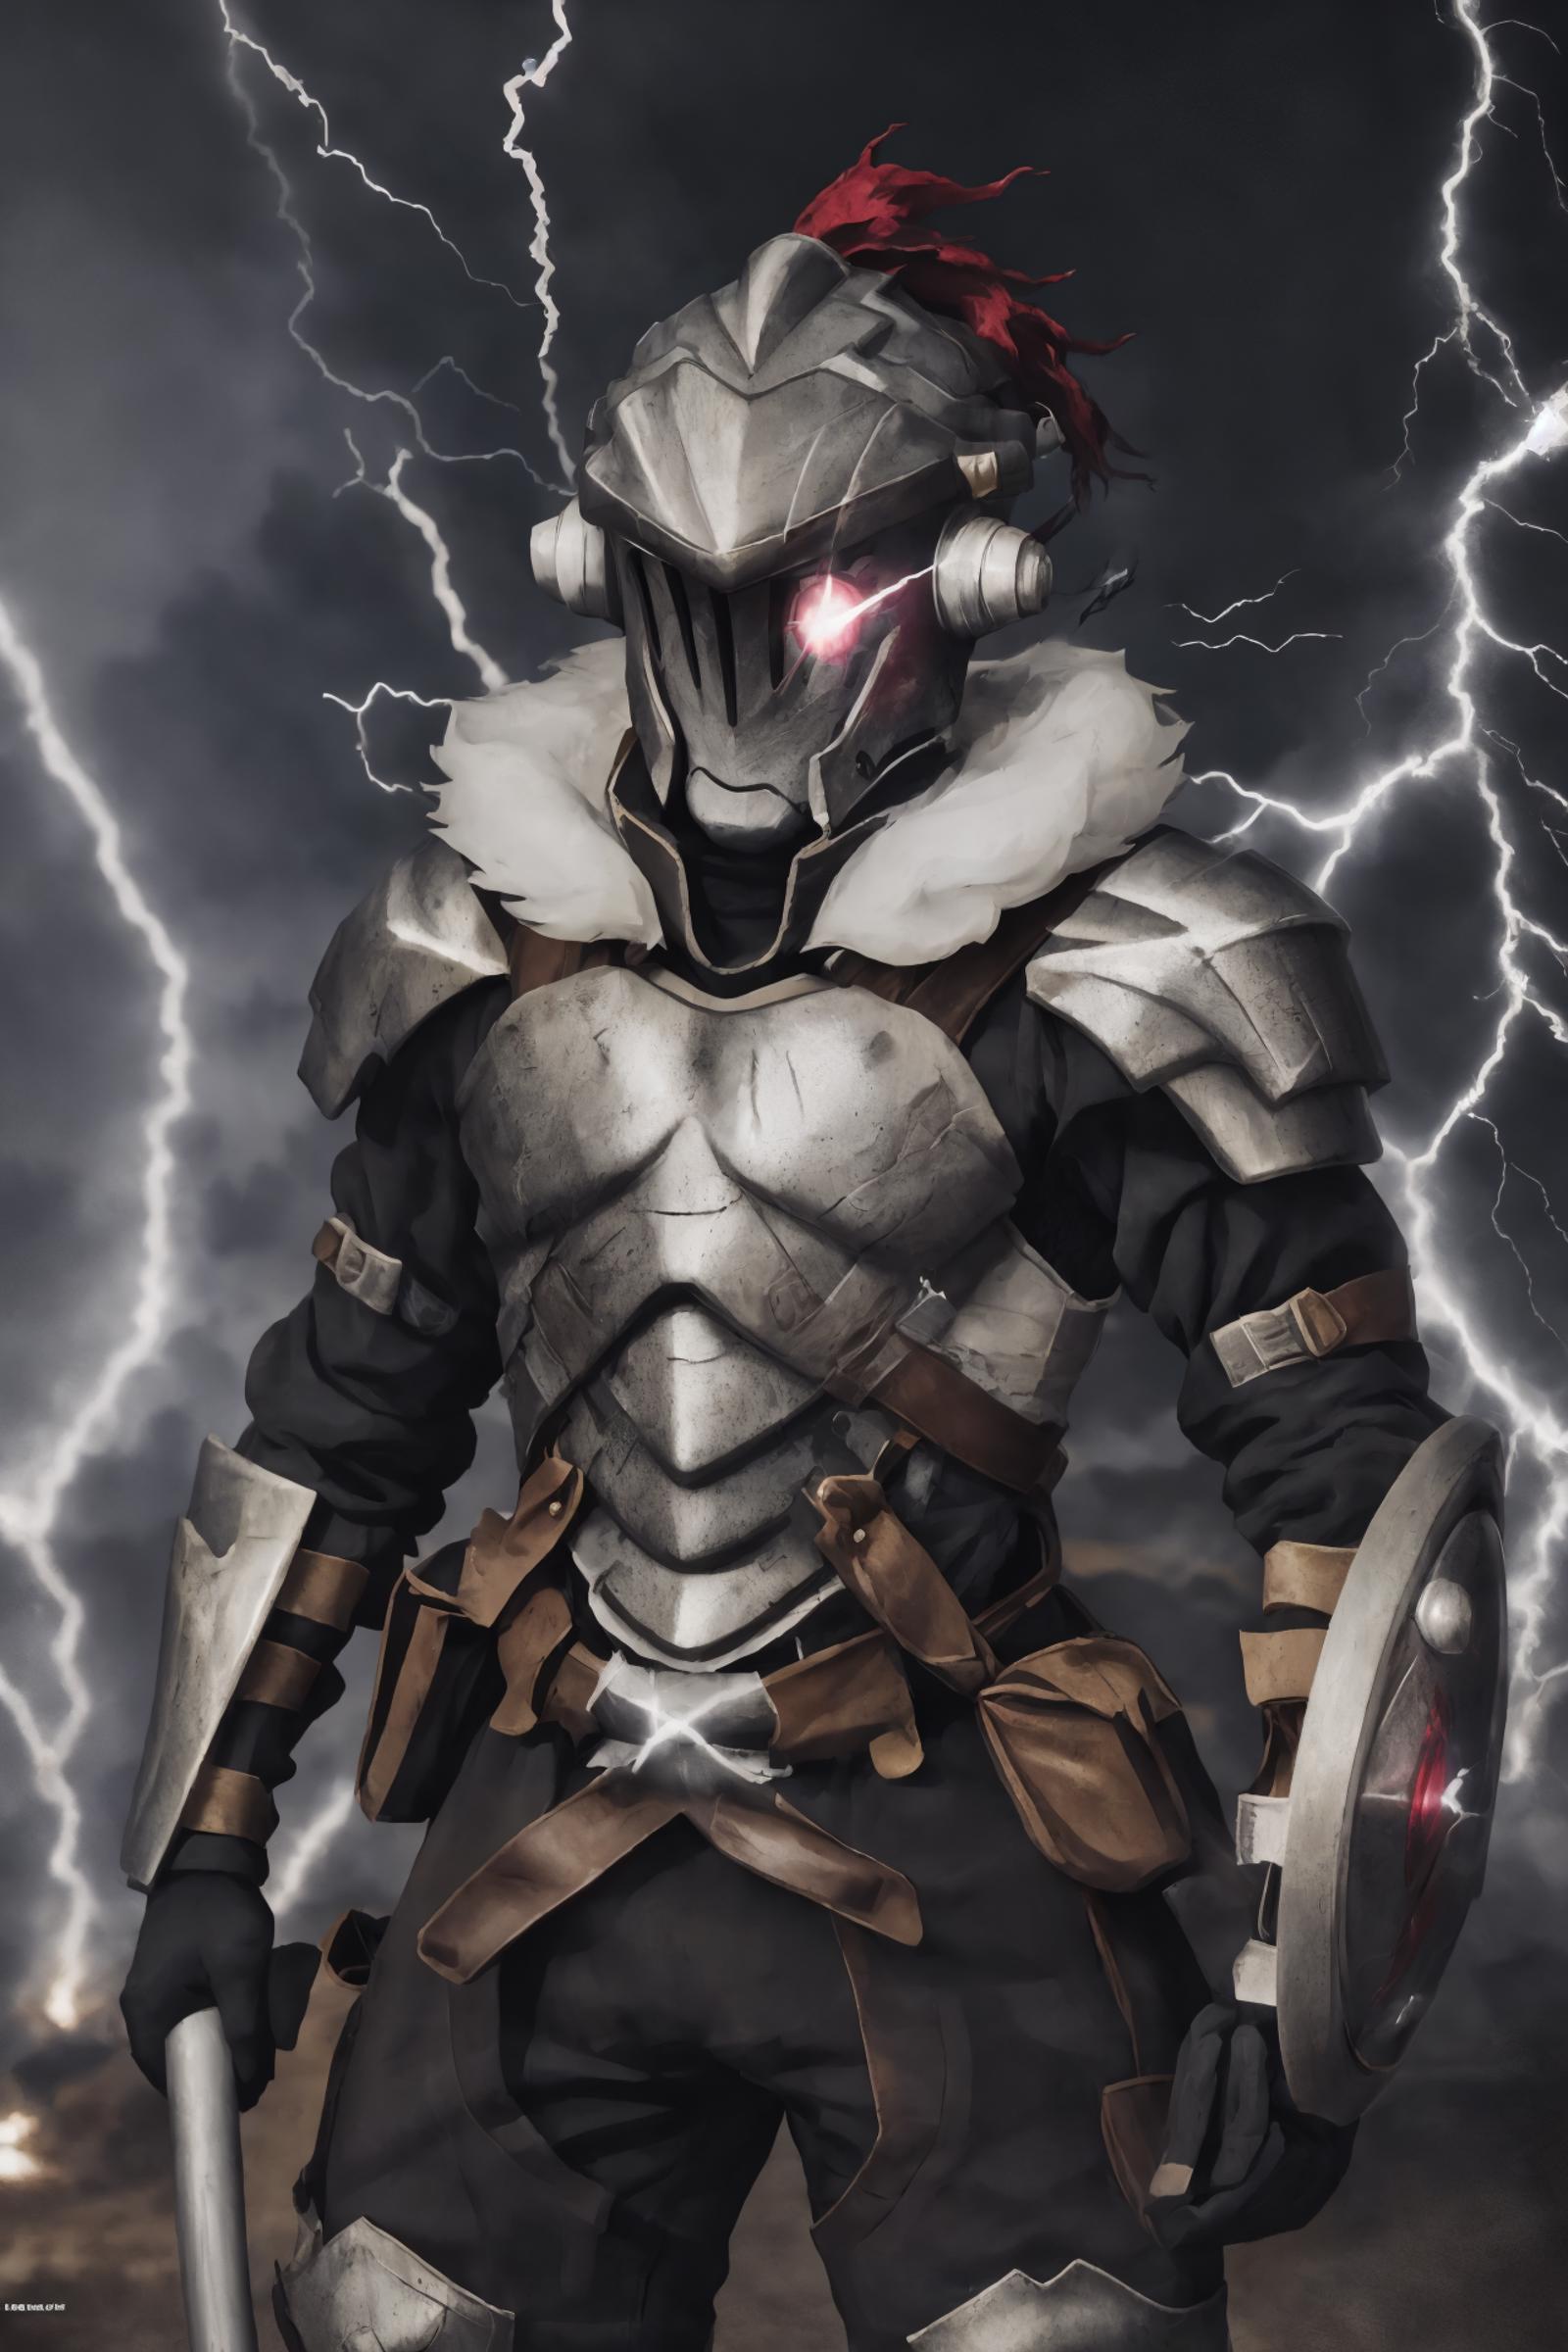 A warrior with a shield and sword, wearing a metal suit and a helmet.